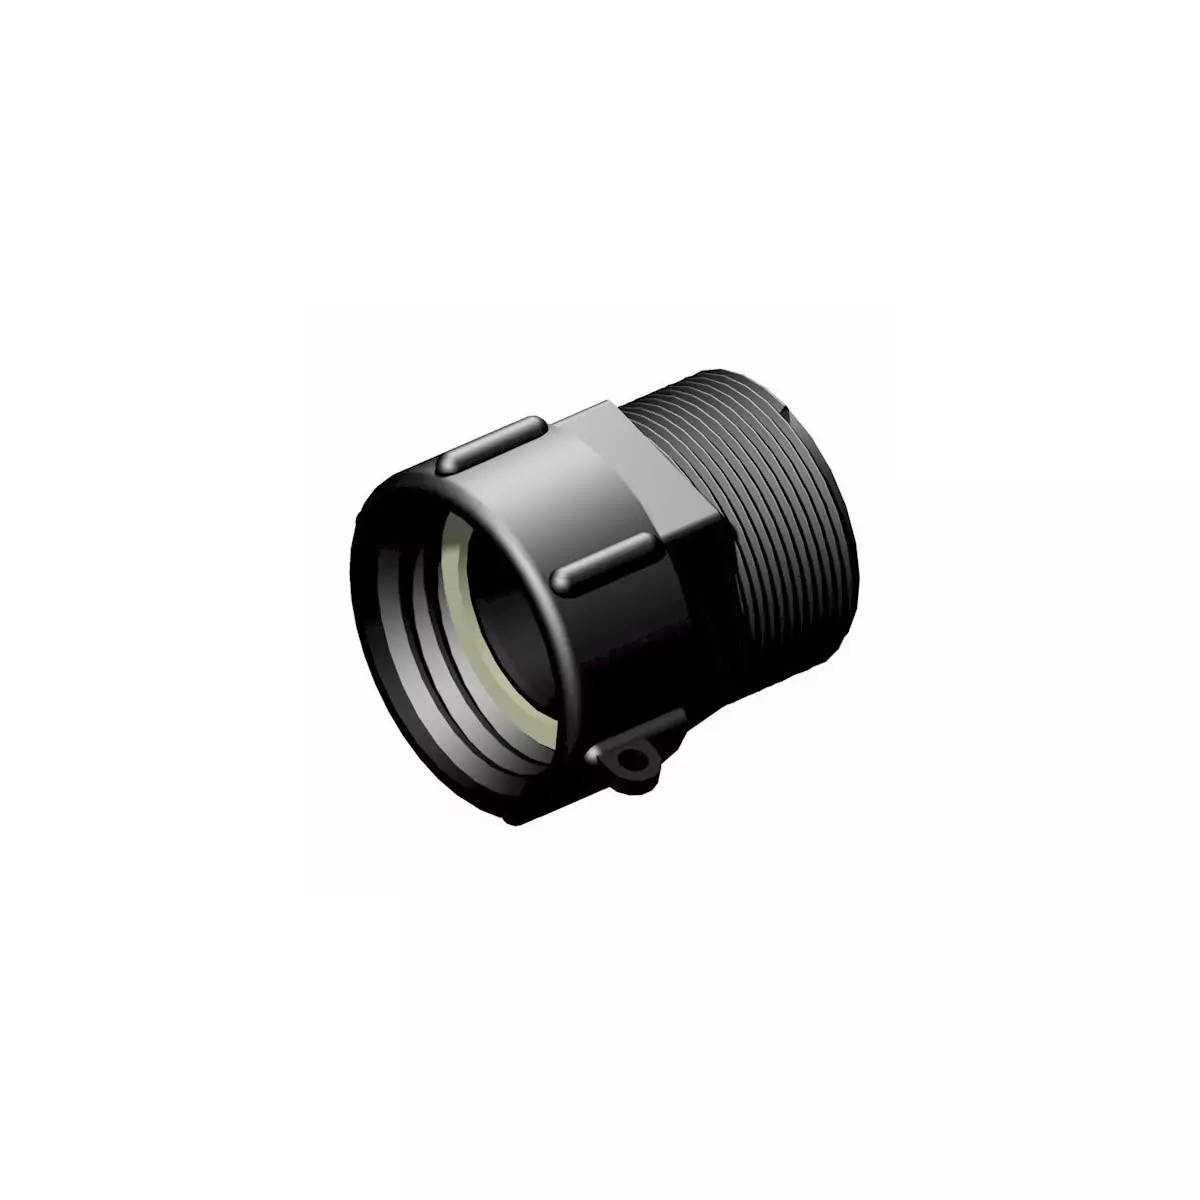 Product sheet 2 "S60x6 female connector - male 2" gas thread